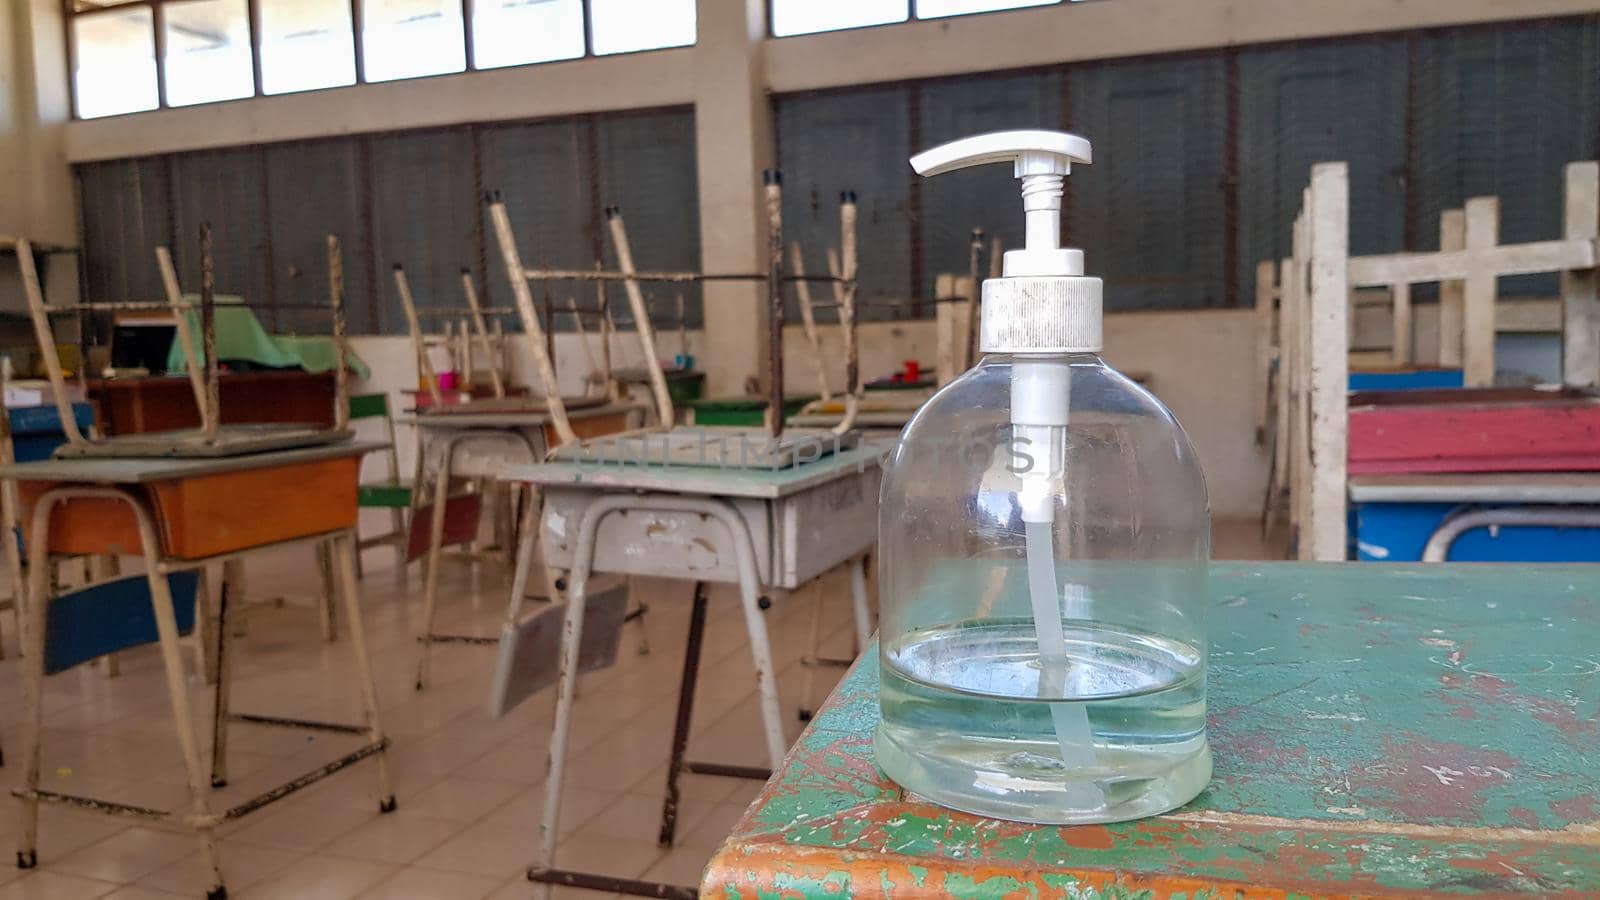 Alcohol gel is placed in a bottle in front of the classroom for students to wash their hands before entering the room.